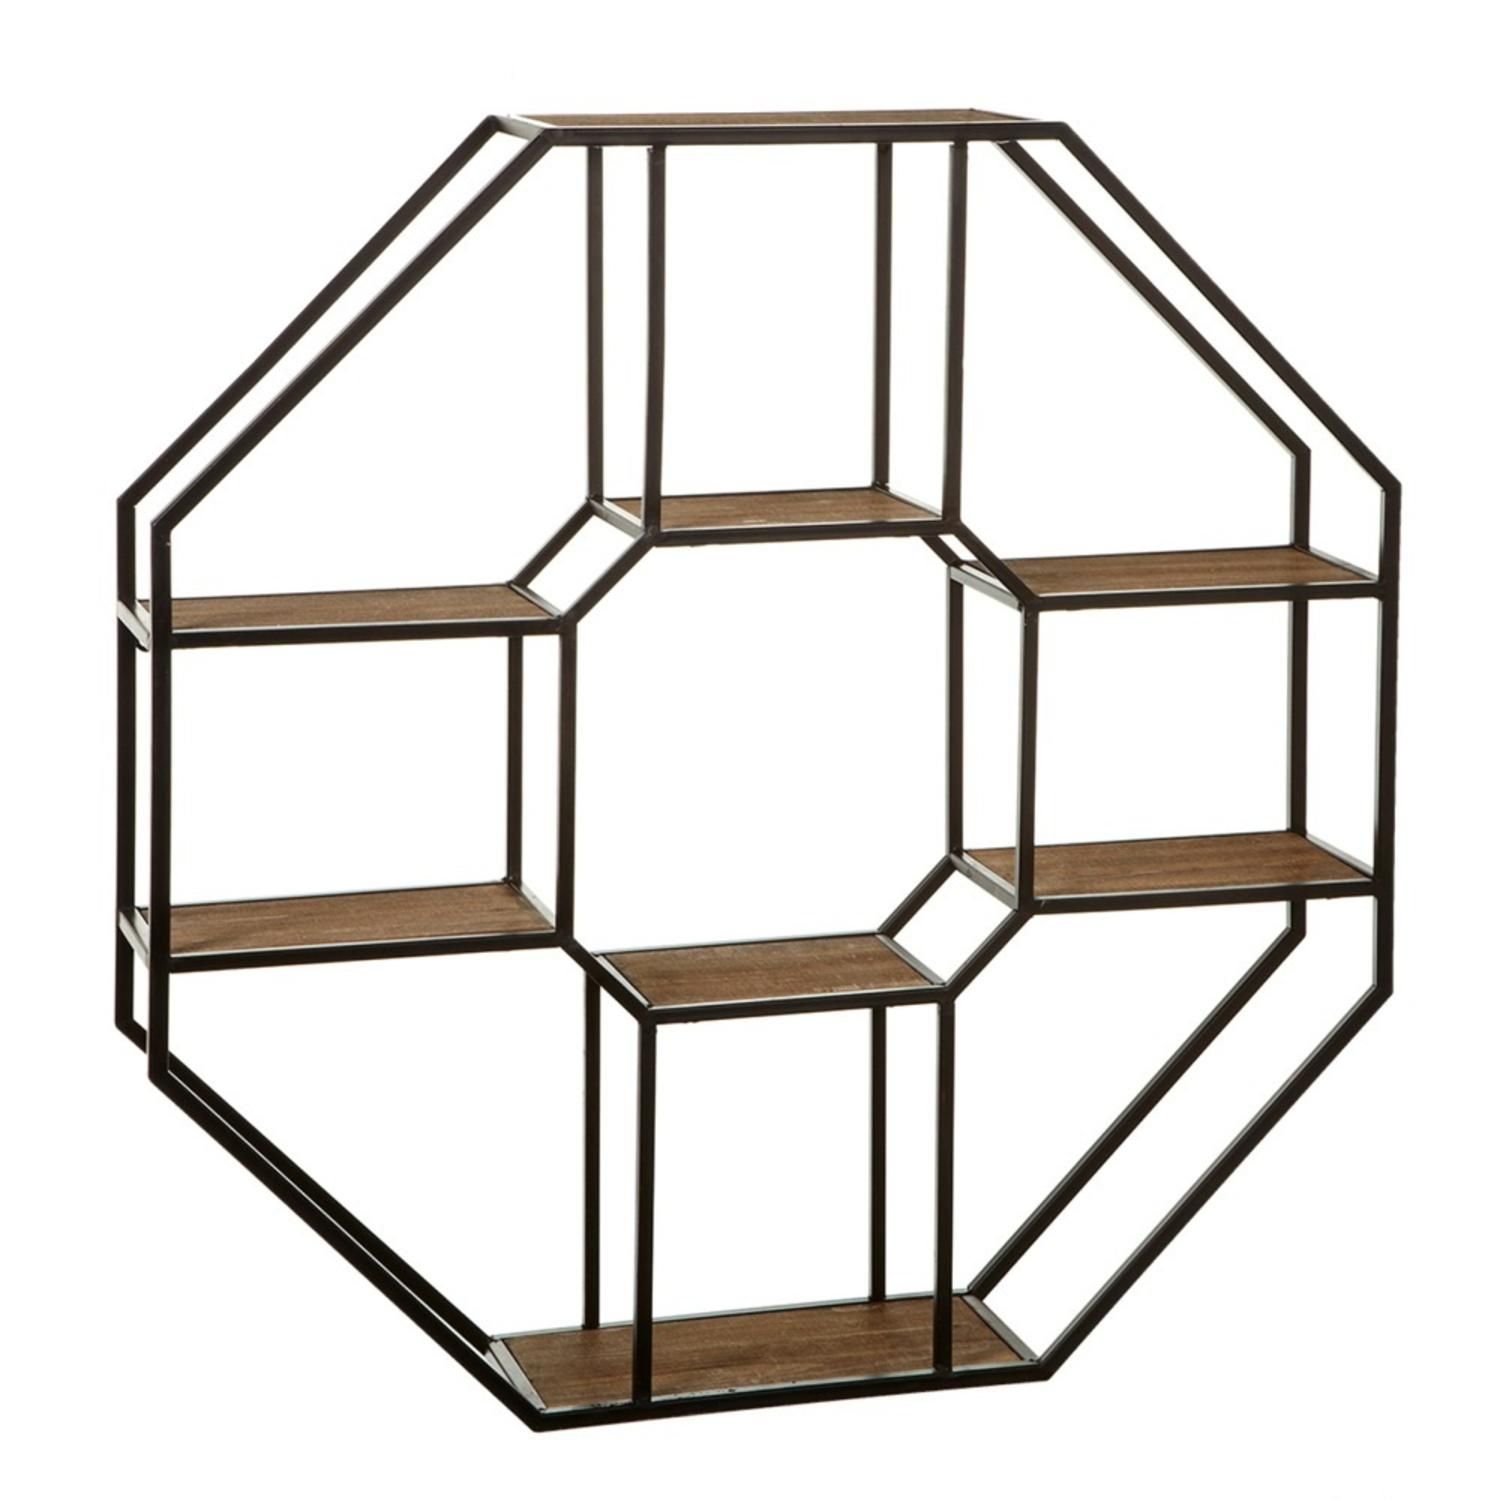 Black And Brown Decorative Metal And Wood Hexagon Wall Inside Hexagons Wood Wall Art (View 10 of 15)